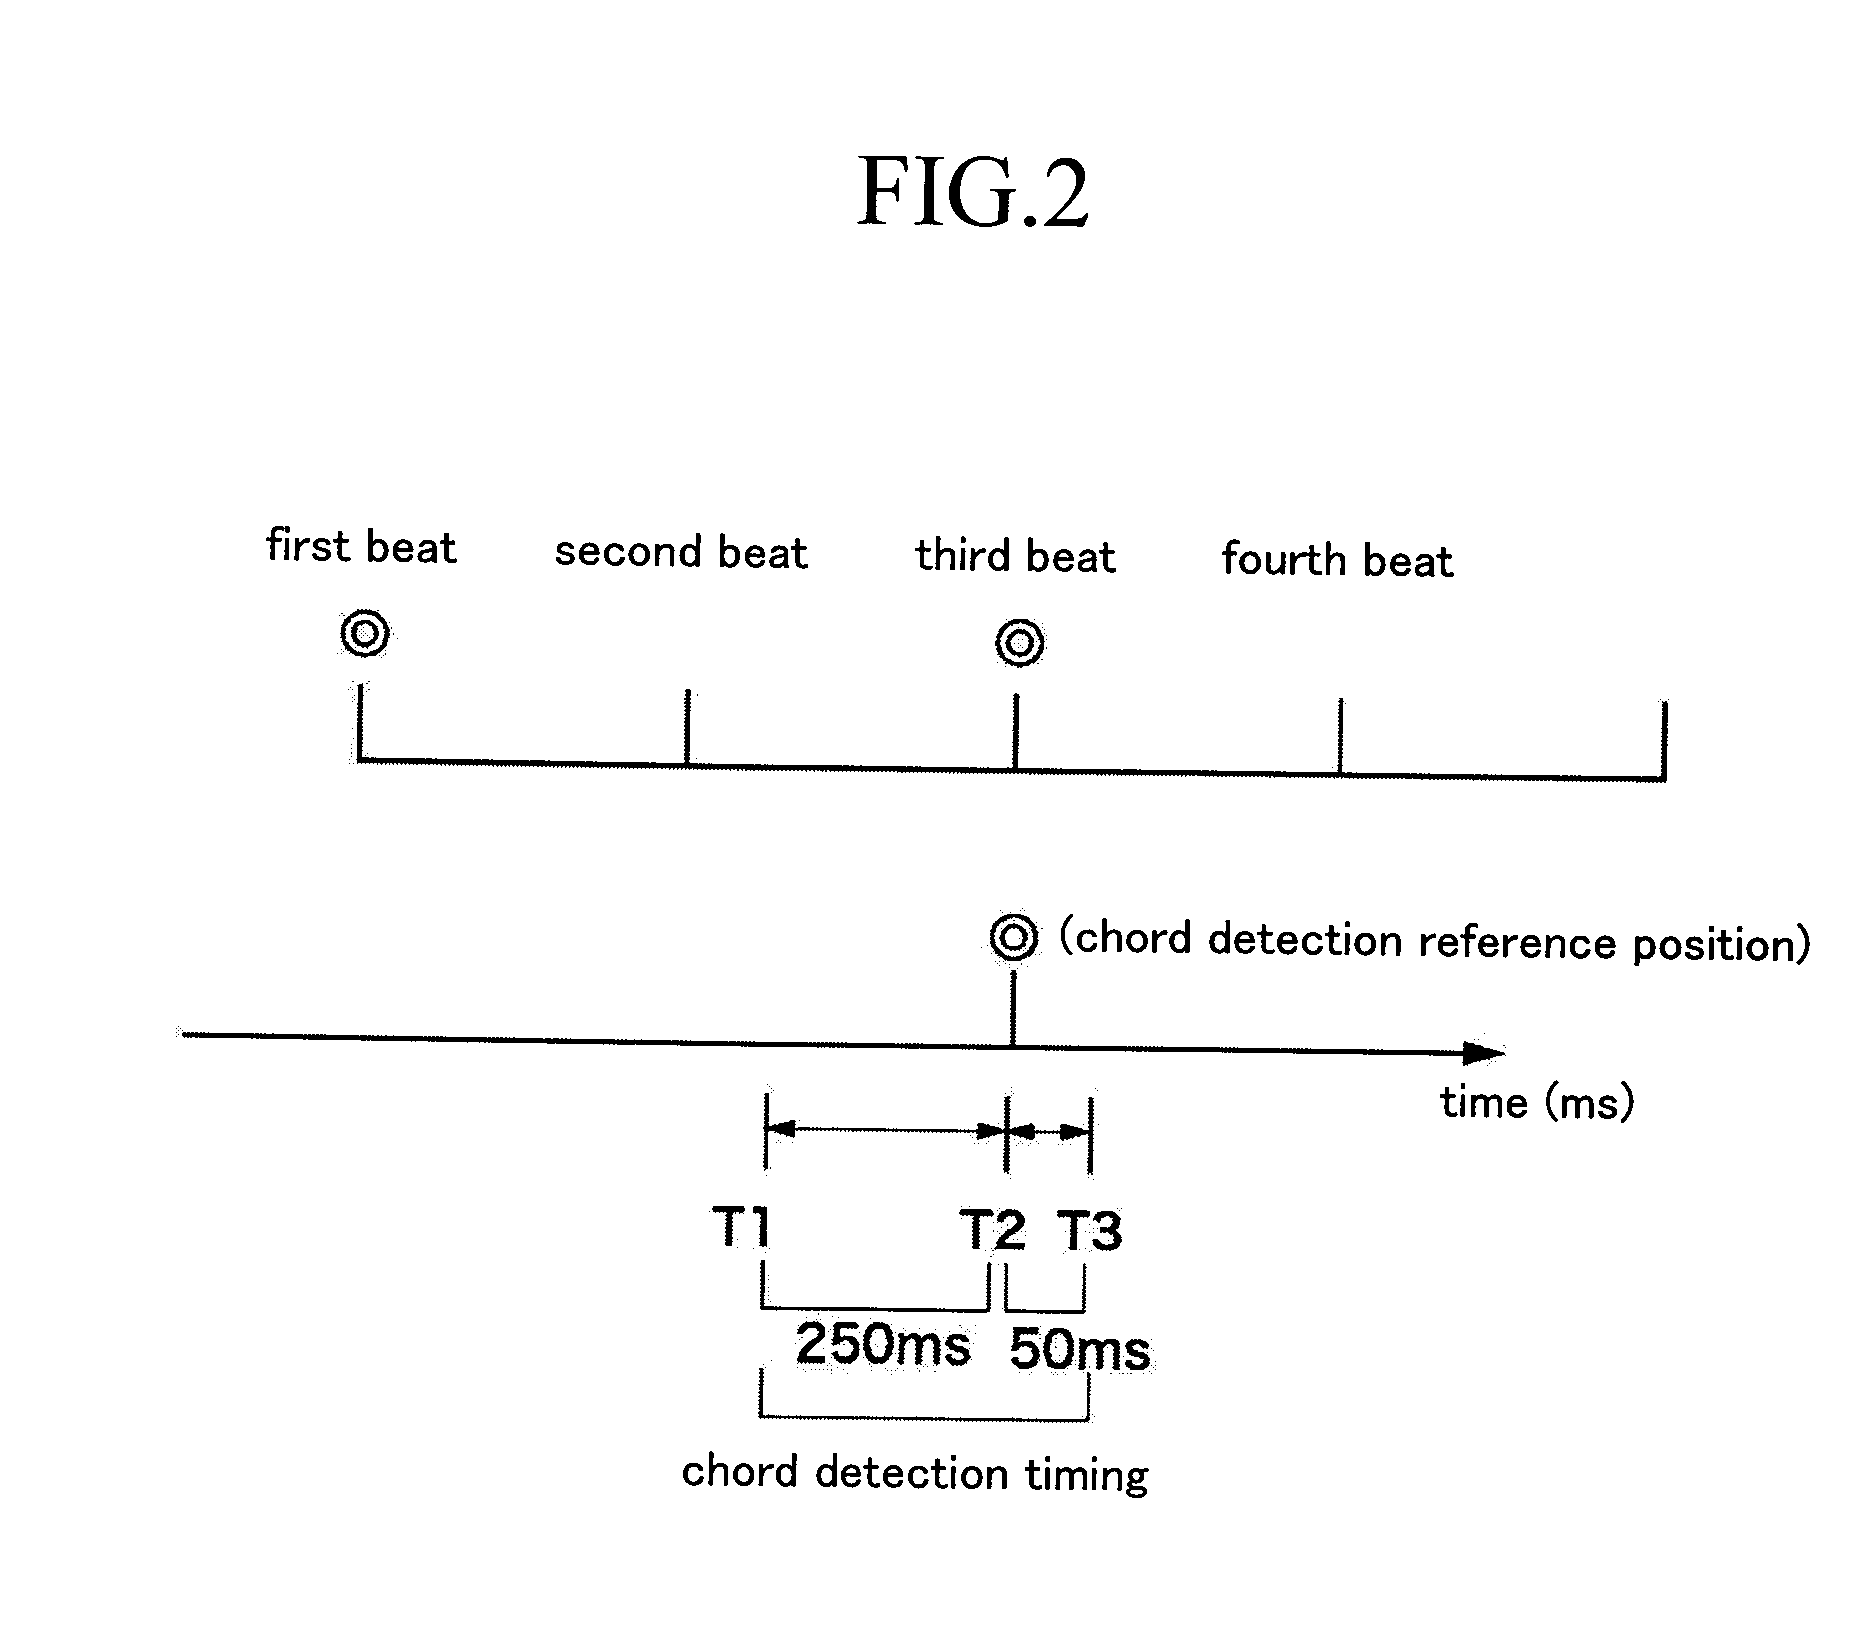 Apparatus and method for detecting chord